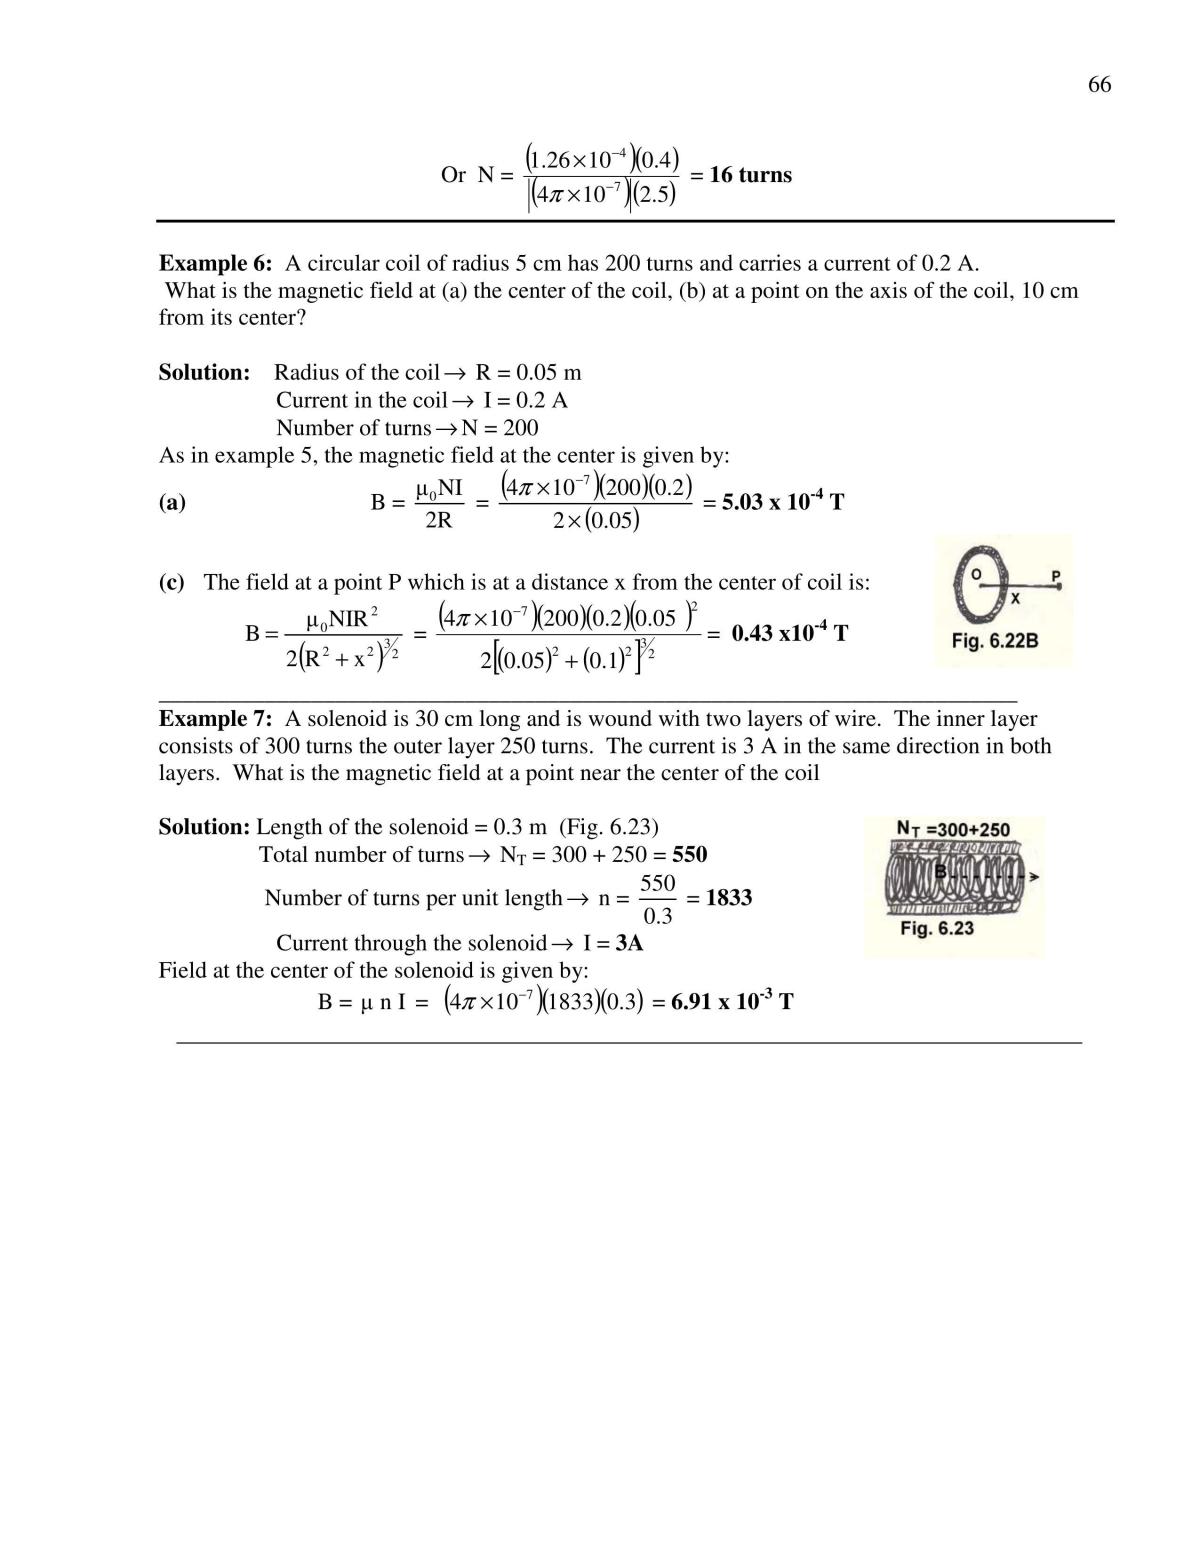 Electricity and Magnetism Study Notes - Page 66